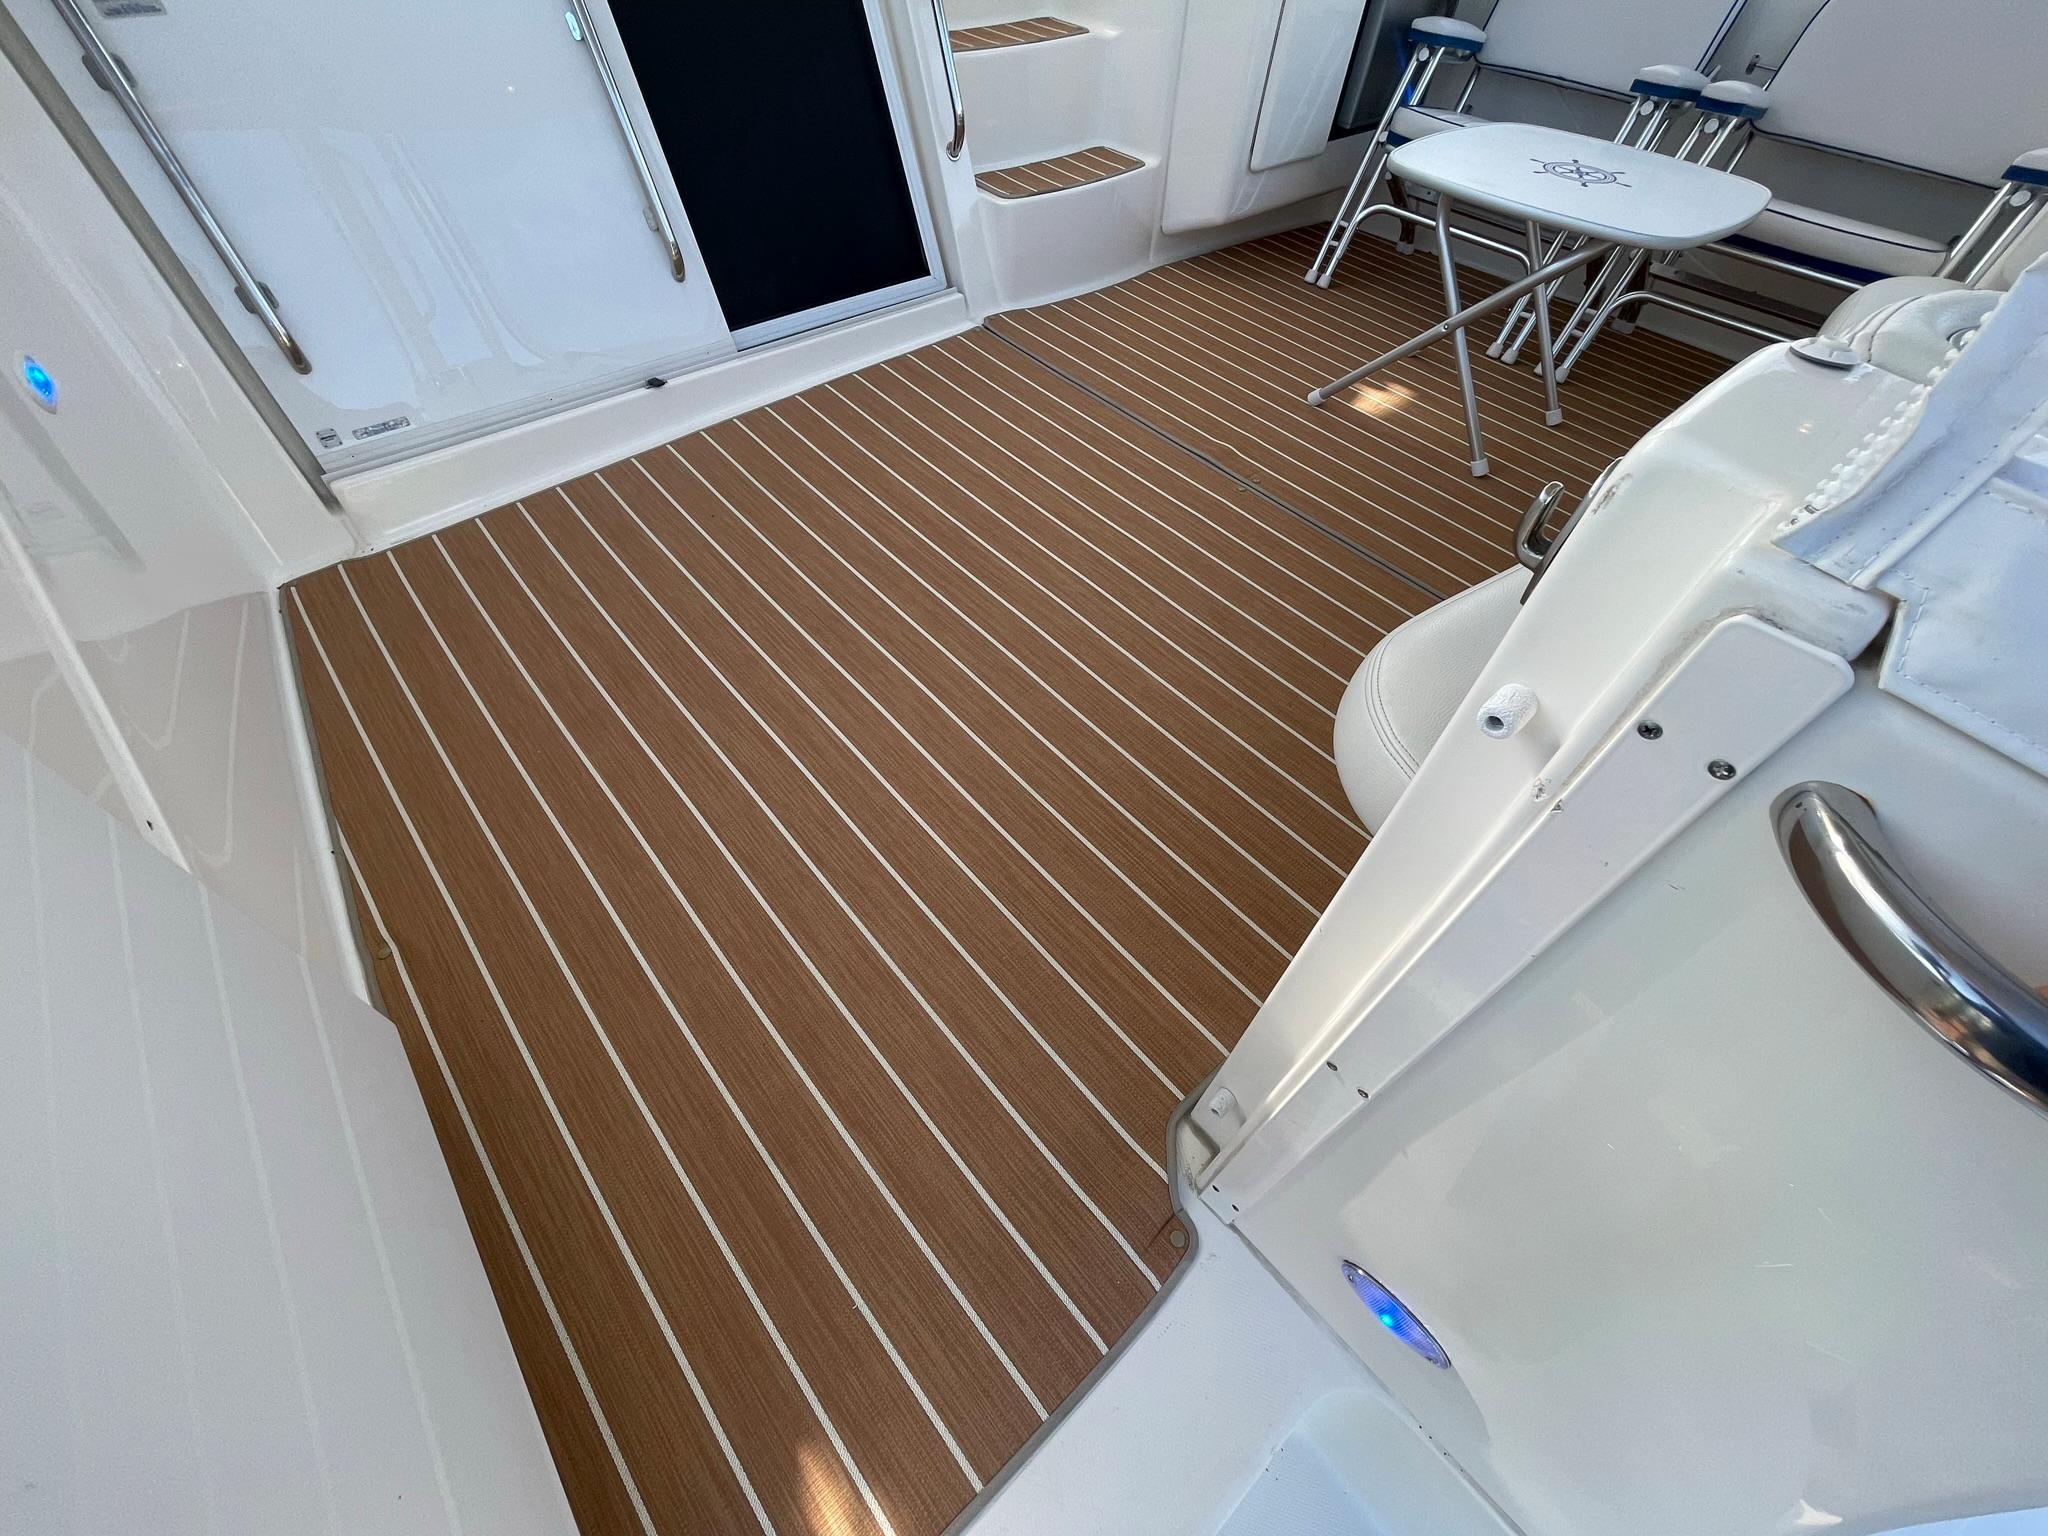 AFT DECK TEAK & HOLLEY RUBBER BACKED SNAP-IN CARPETS THROUGHOUT!